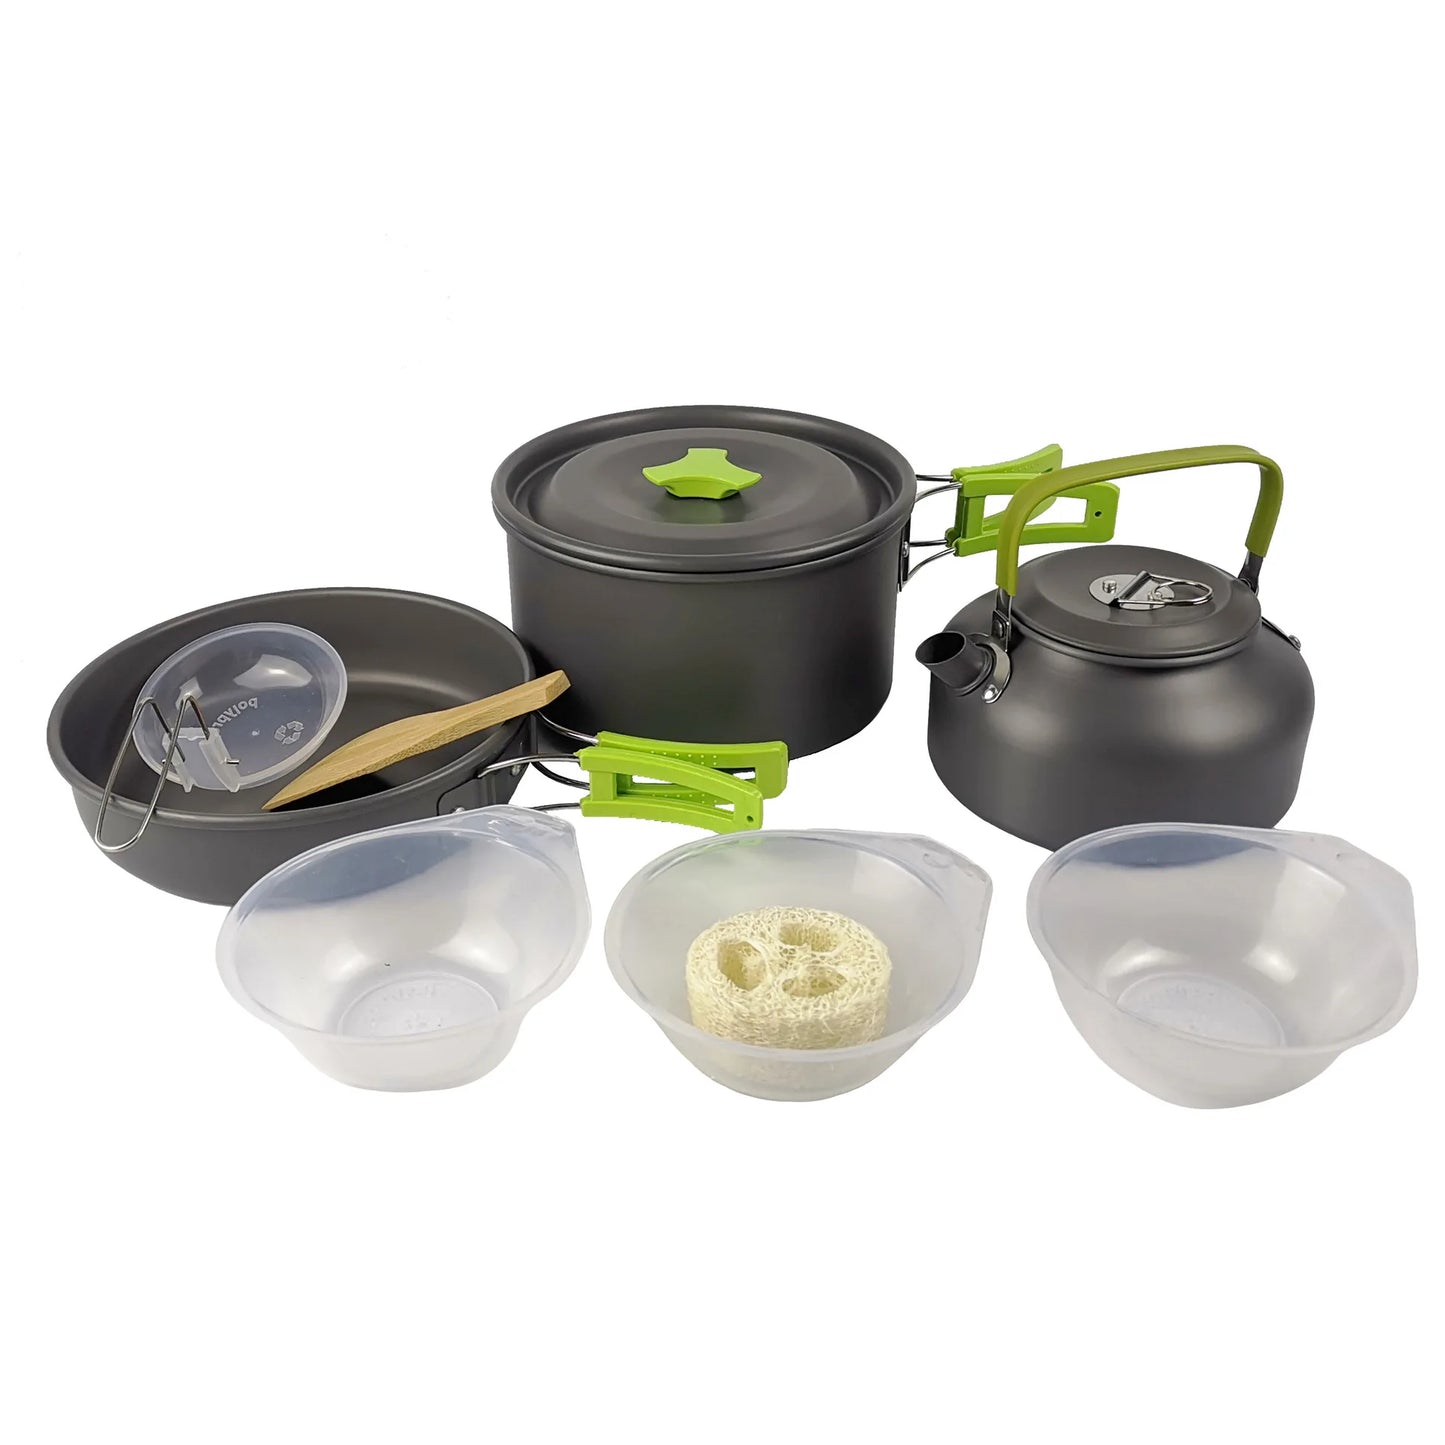 Camping Cooking Utensils Outdoor Aluminum Tableware Set Kettle  Pans Pots Hiking Picnic Travelling Tourist Supplies Equipment